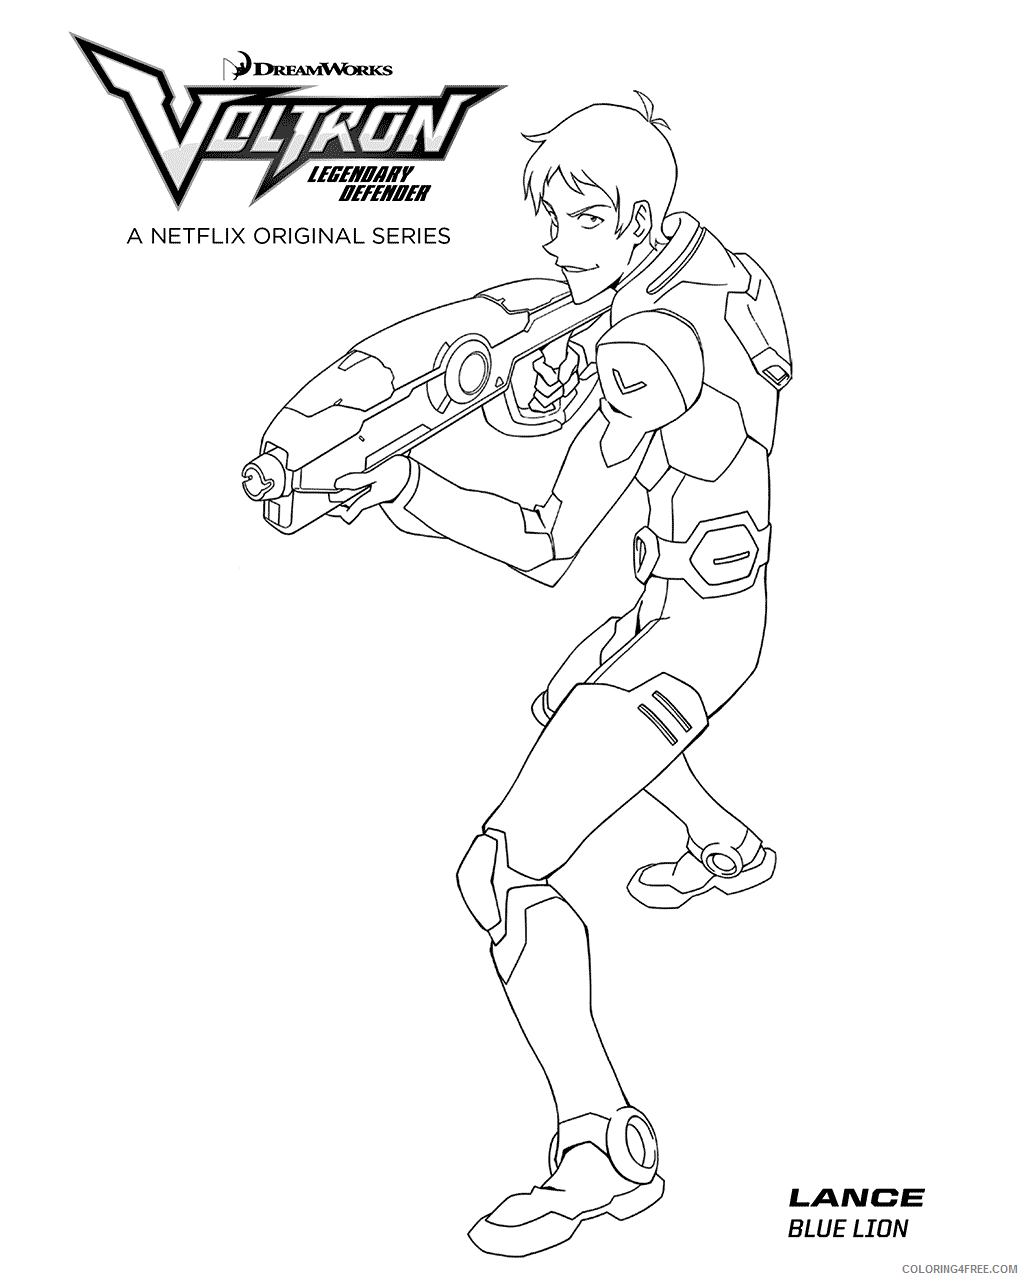 Voltron Coloring Pages TV Film Voltron Lance Printable 2020 11127 Coloring4free